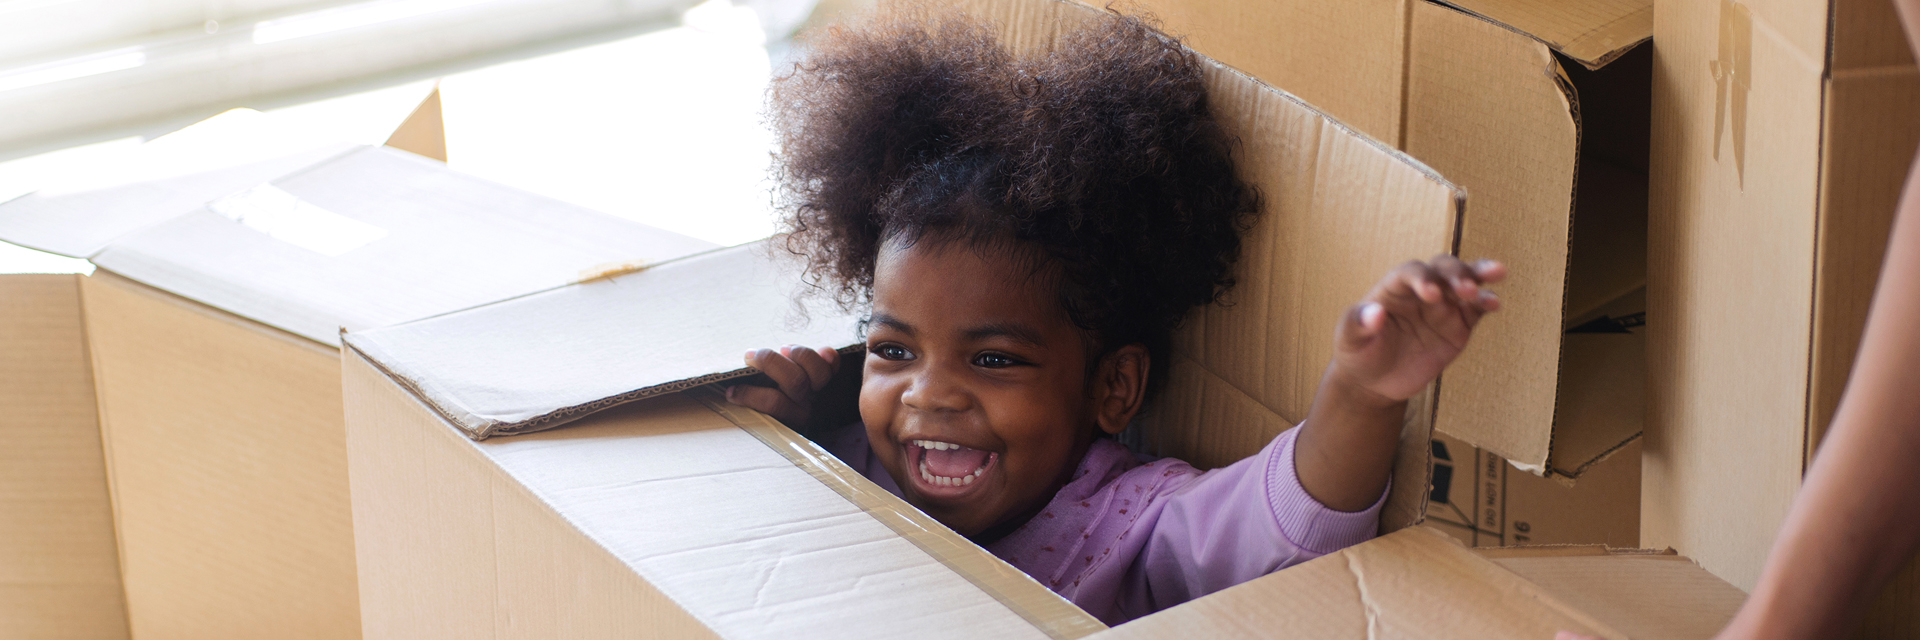 Little girl playing in empty box